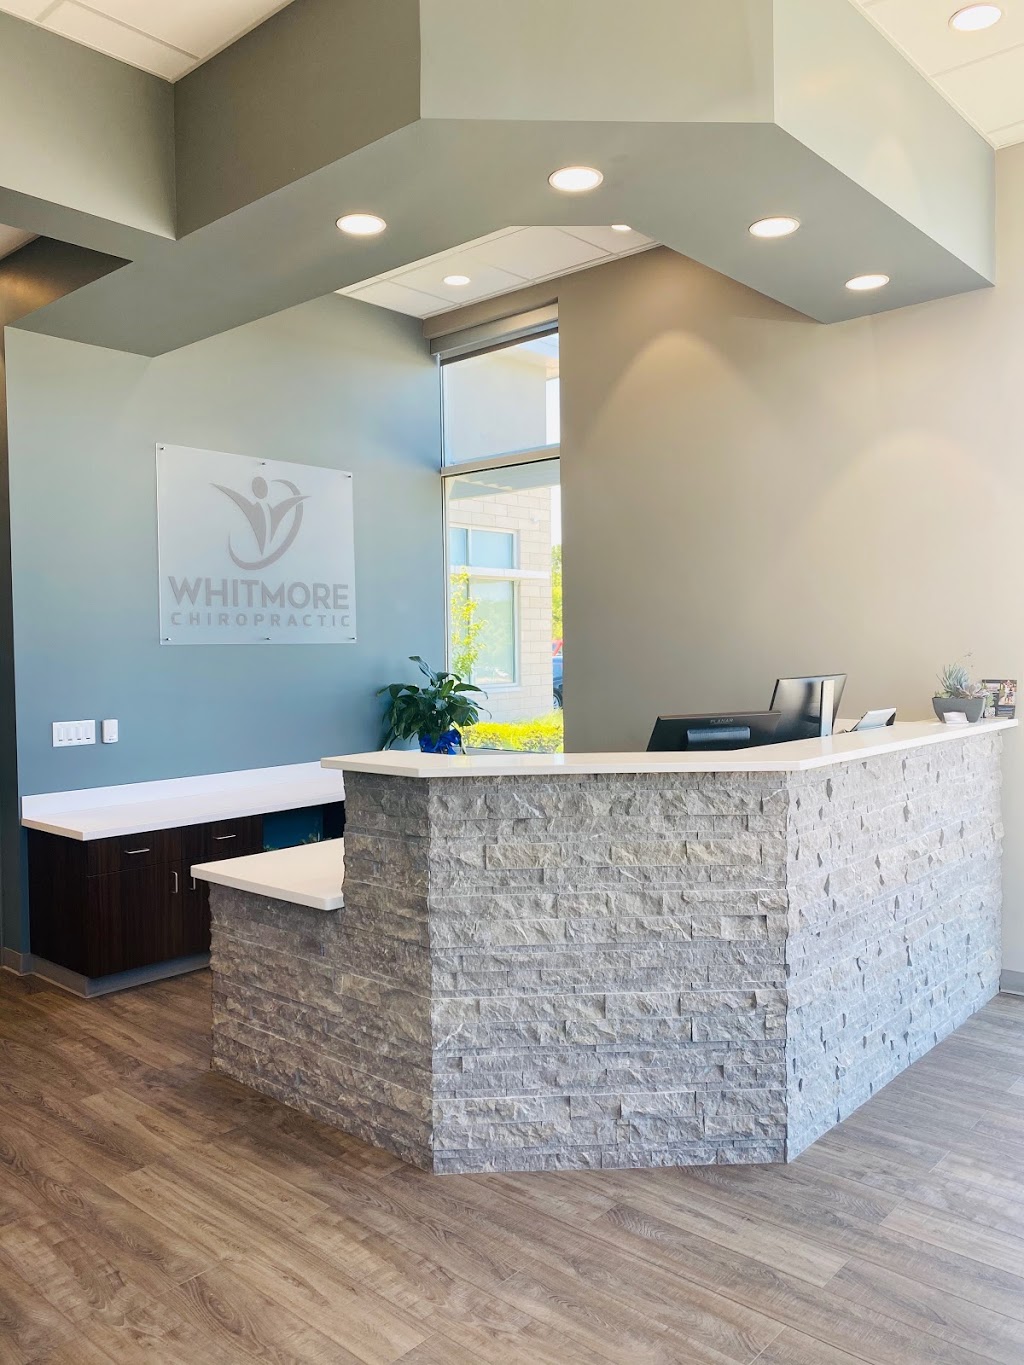 Whitmore Chiropractic | 12101 W 110th St Suite 200, Overland Park, KS 66210 | Phone: (913) 428-0525